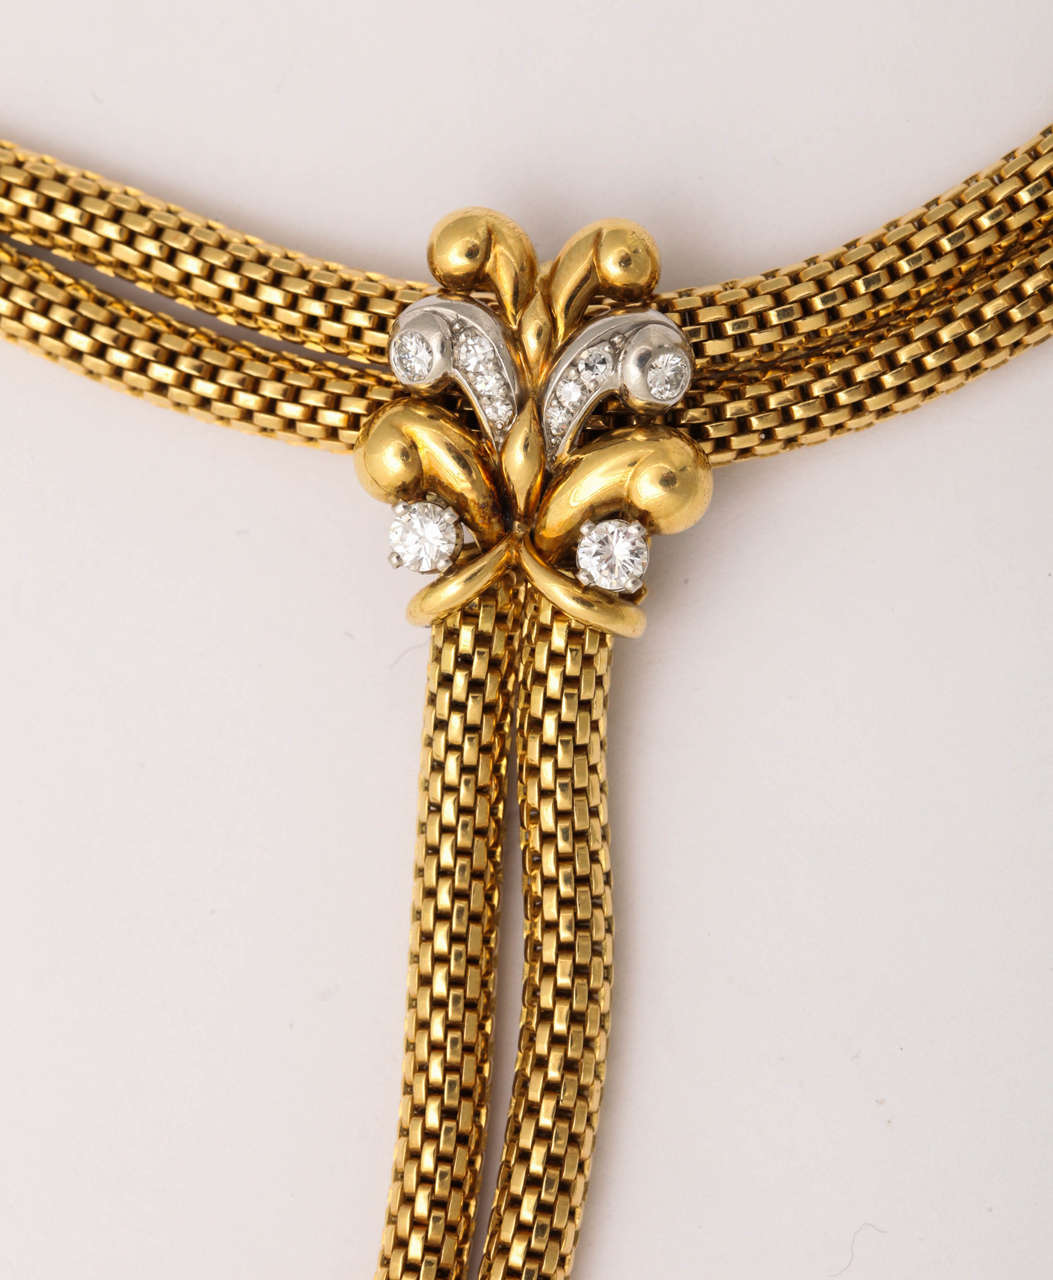 Italian Retro Woven 18-Karat Gold Double Rope Necklace with Diamond Clip and Fringe